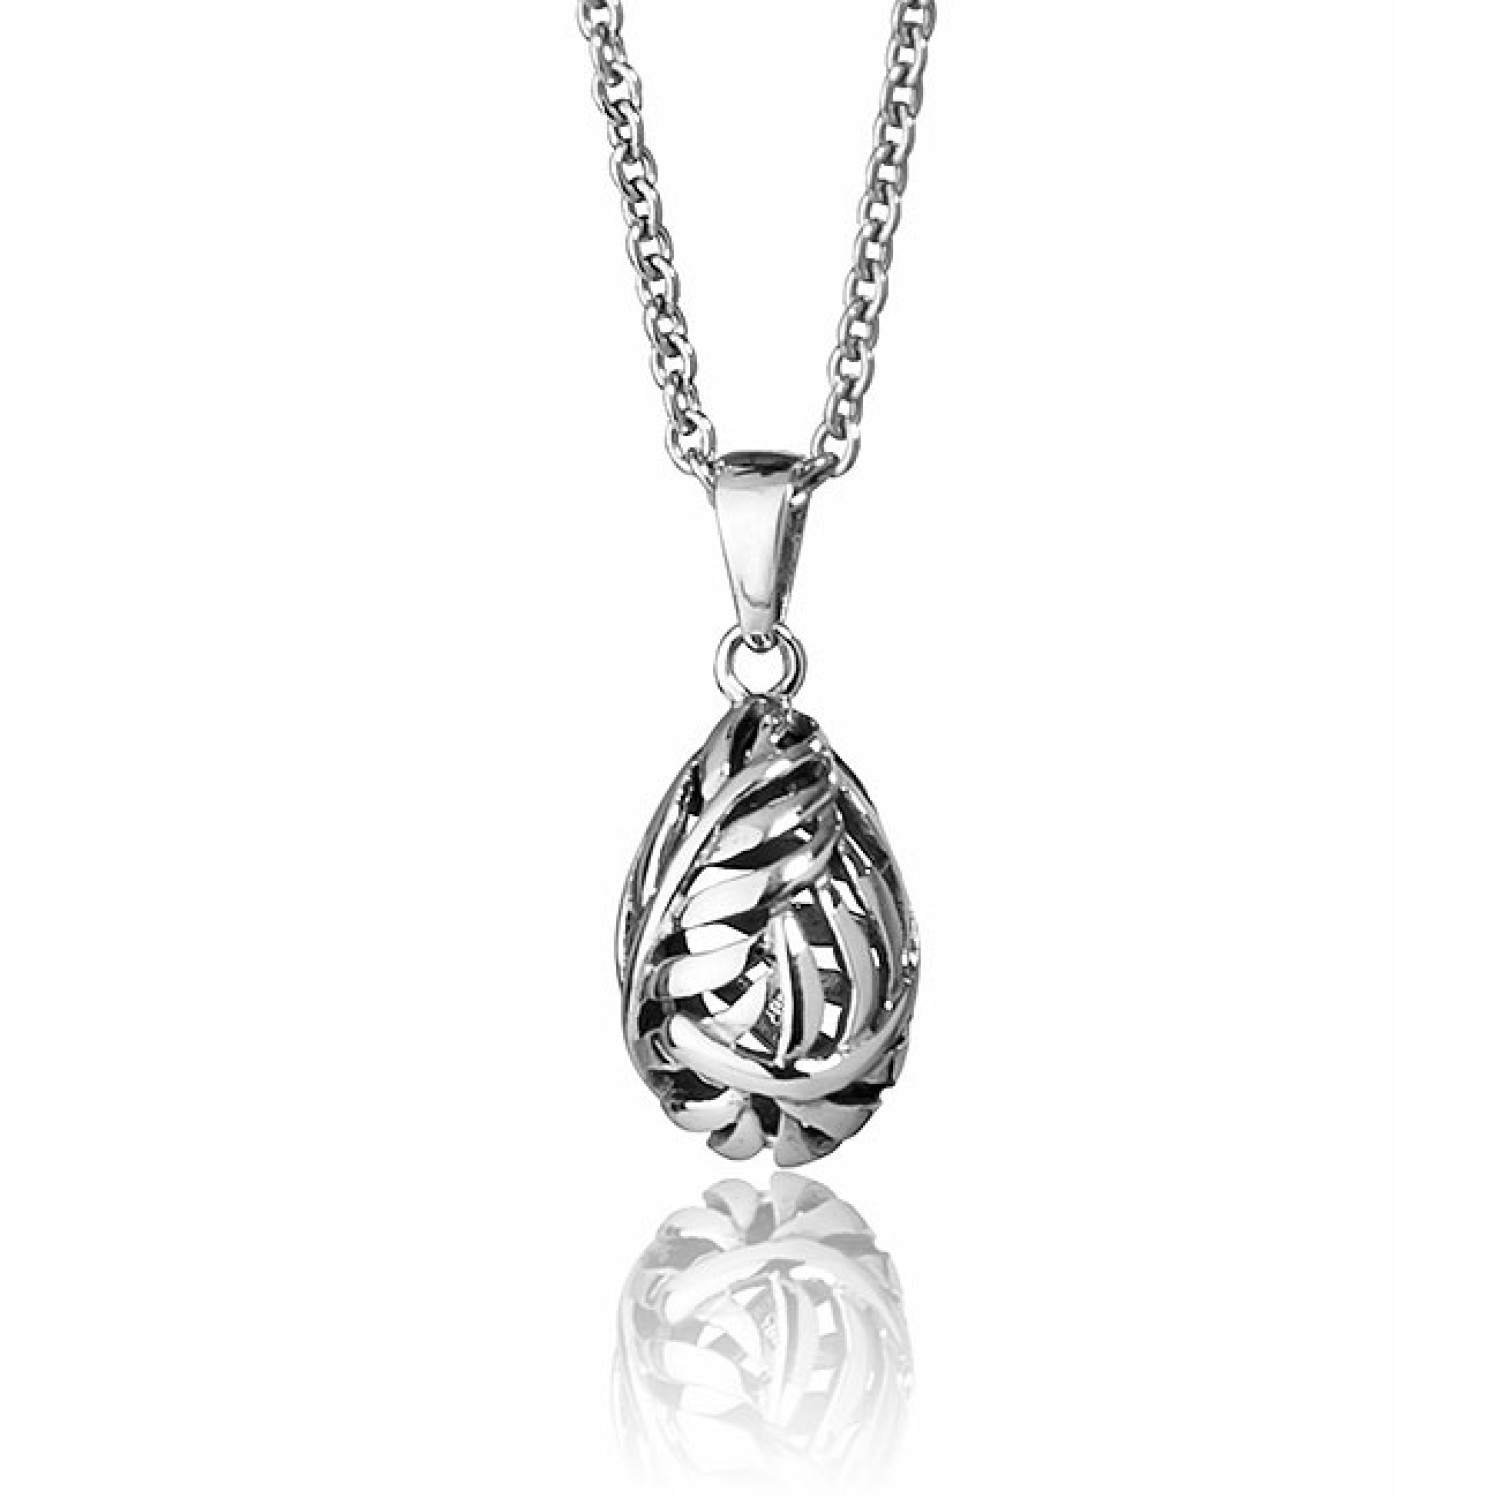 Evolve Silver Fern Pendant. Evolves silver fern pendant honours New Zealand’s beautiful flora and fauna.  This intricately wrapped fern represents inner strength and protection.  A treasured New Zealand symbol that can be worn with pride @christies.online